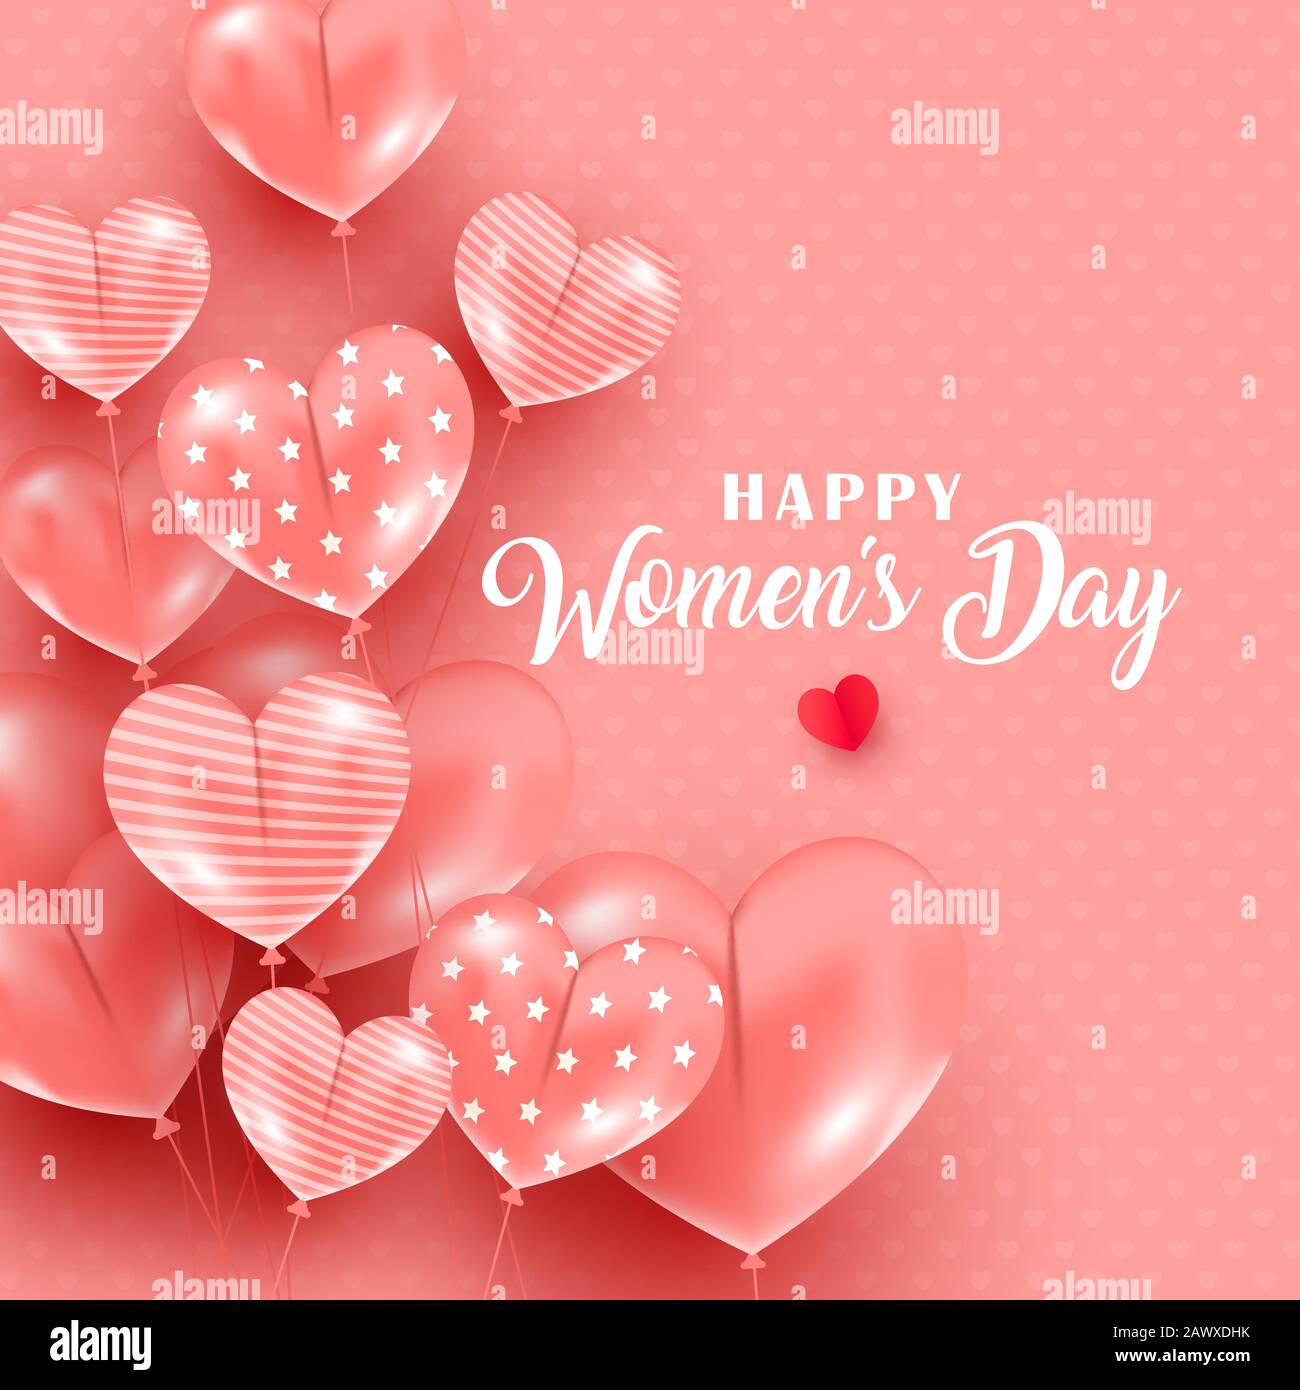 Creative Women Day greeting card with heart balloons and greeting ...